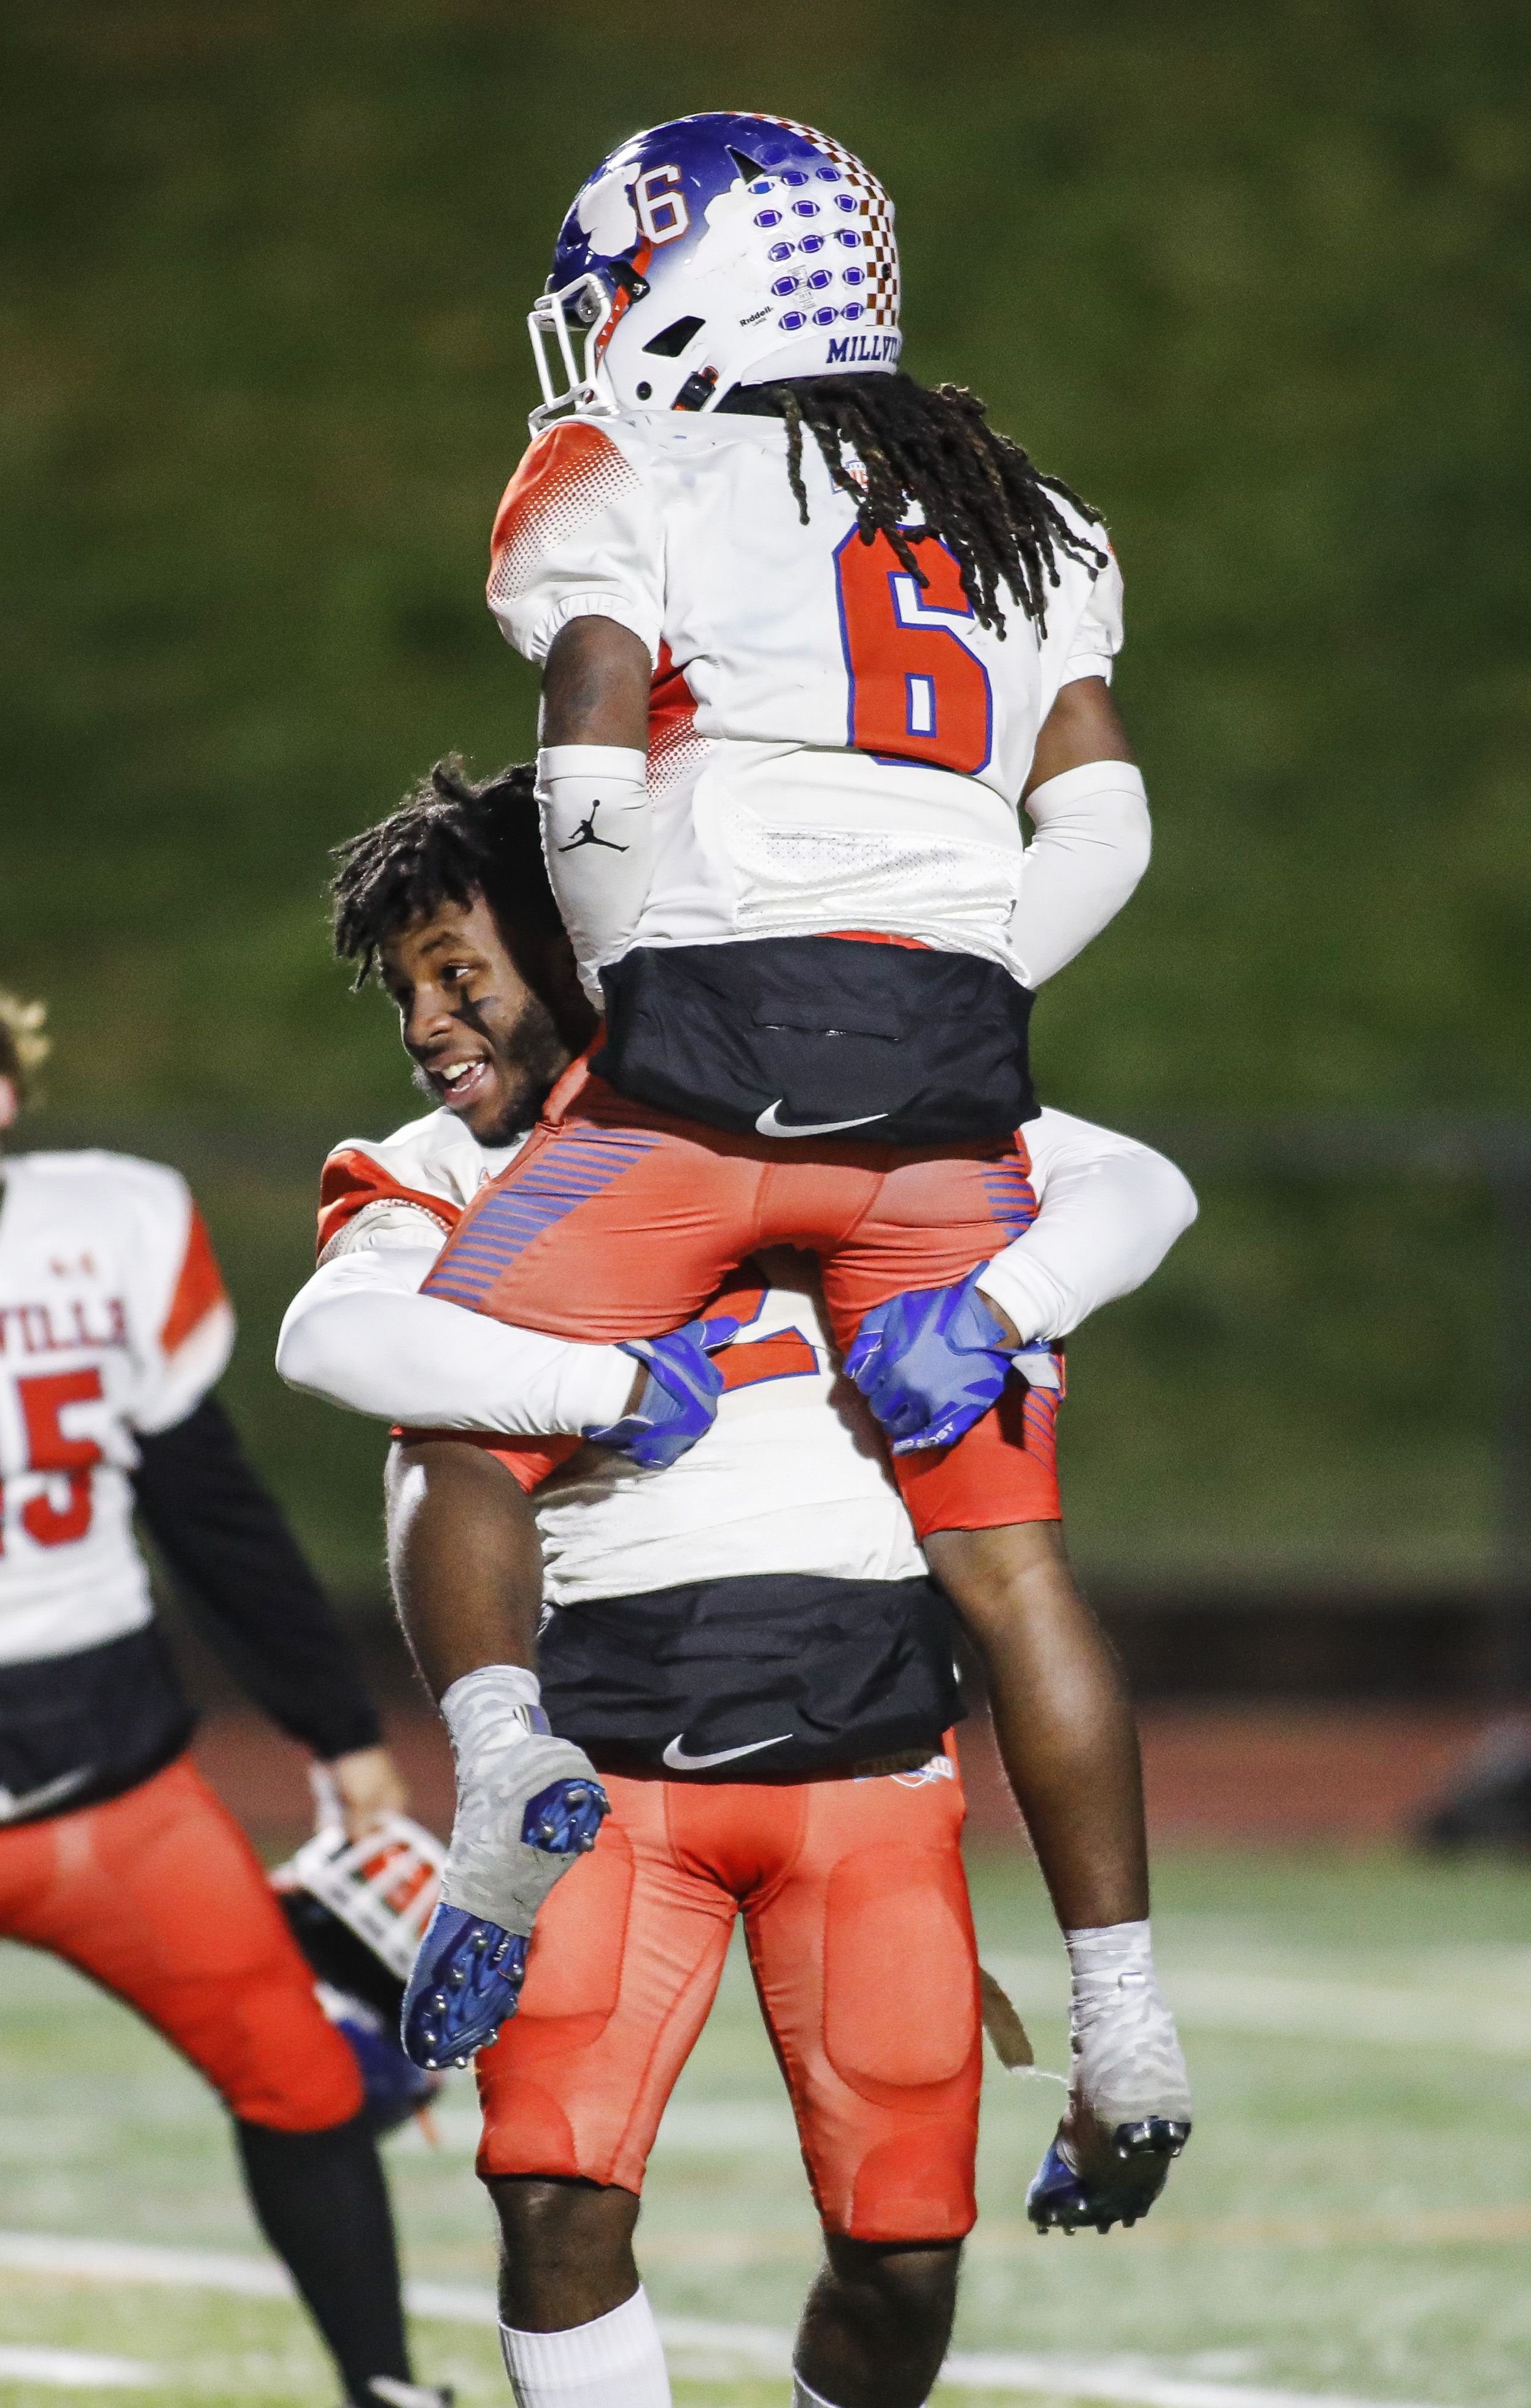 Millville football defeats Mainland in state semis with last-minute TD